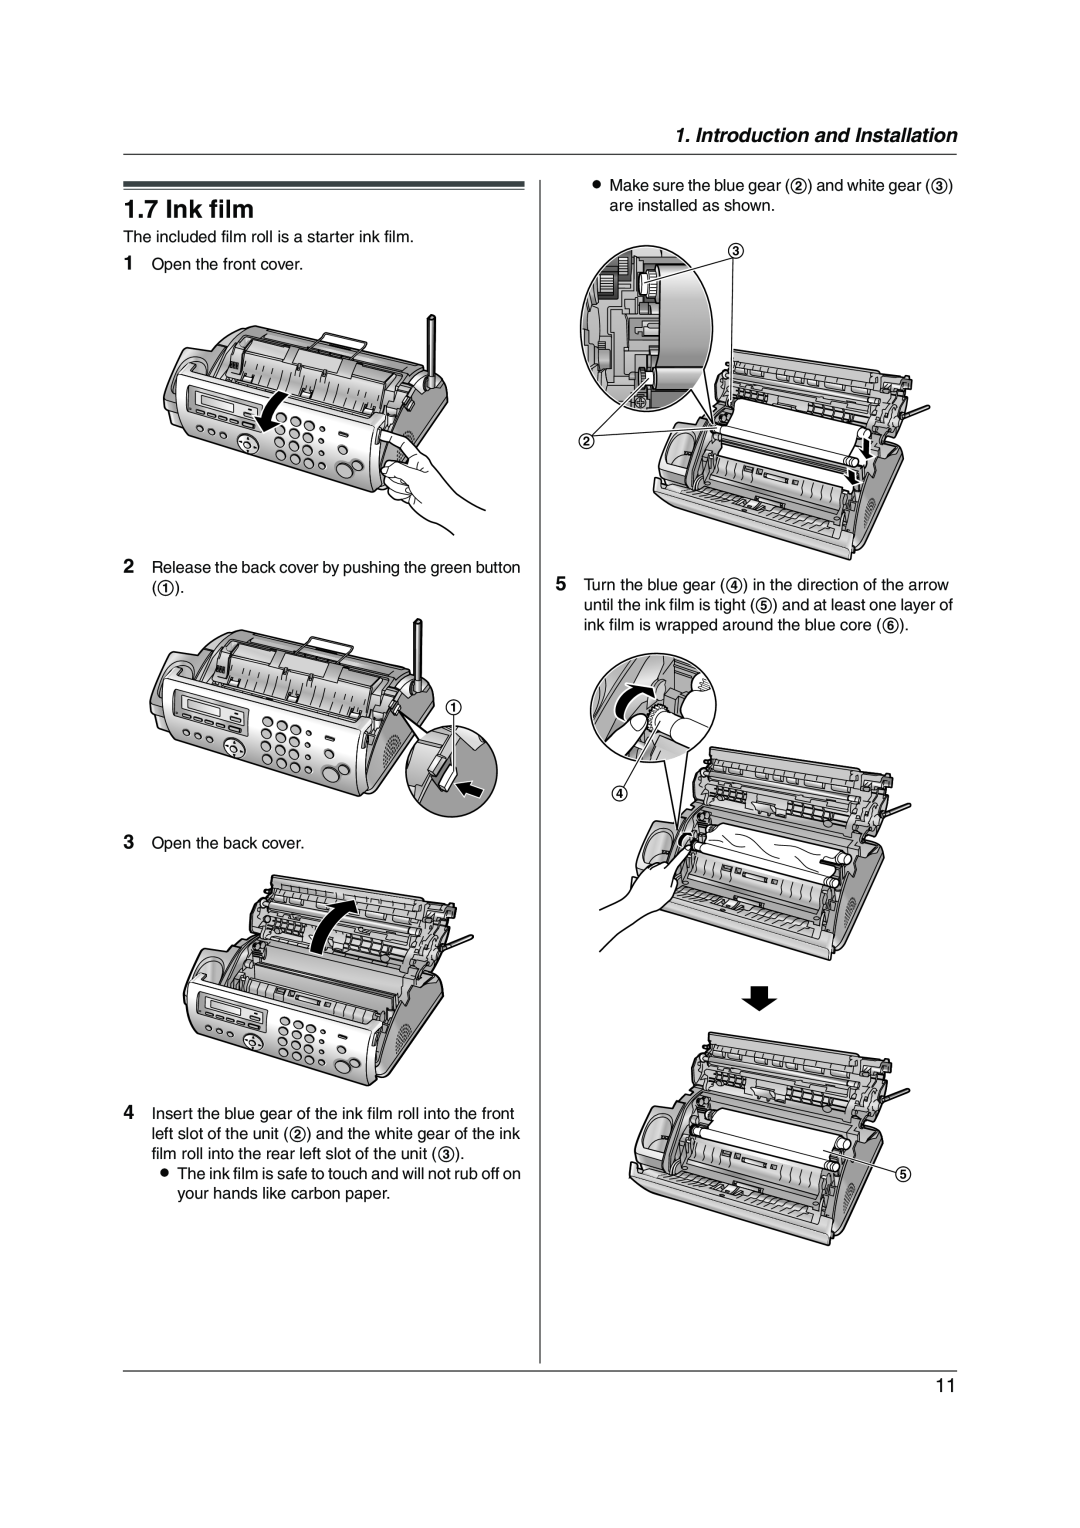 Panasonic KX-FC228HK operating instructions Ink film, Introduction and Installation 